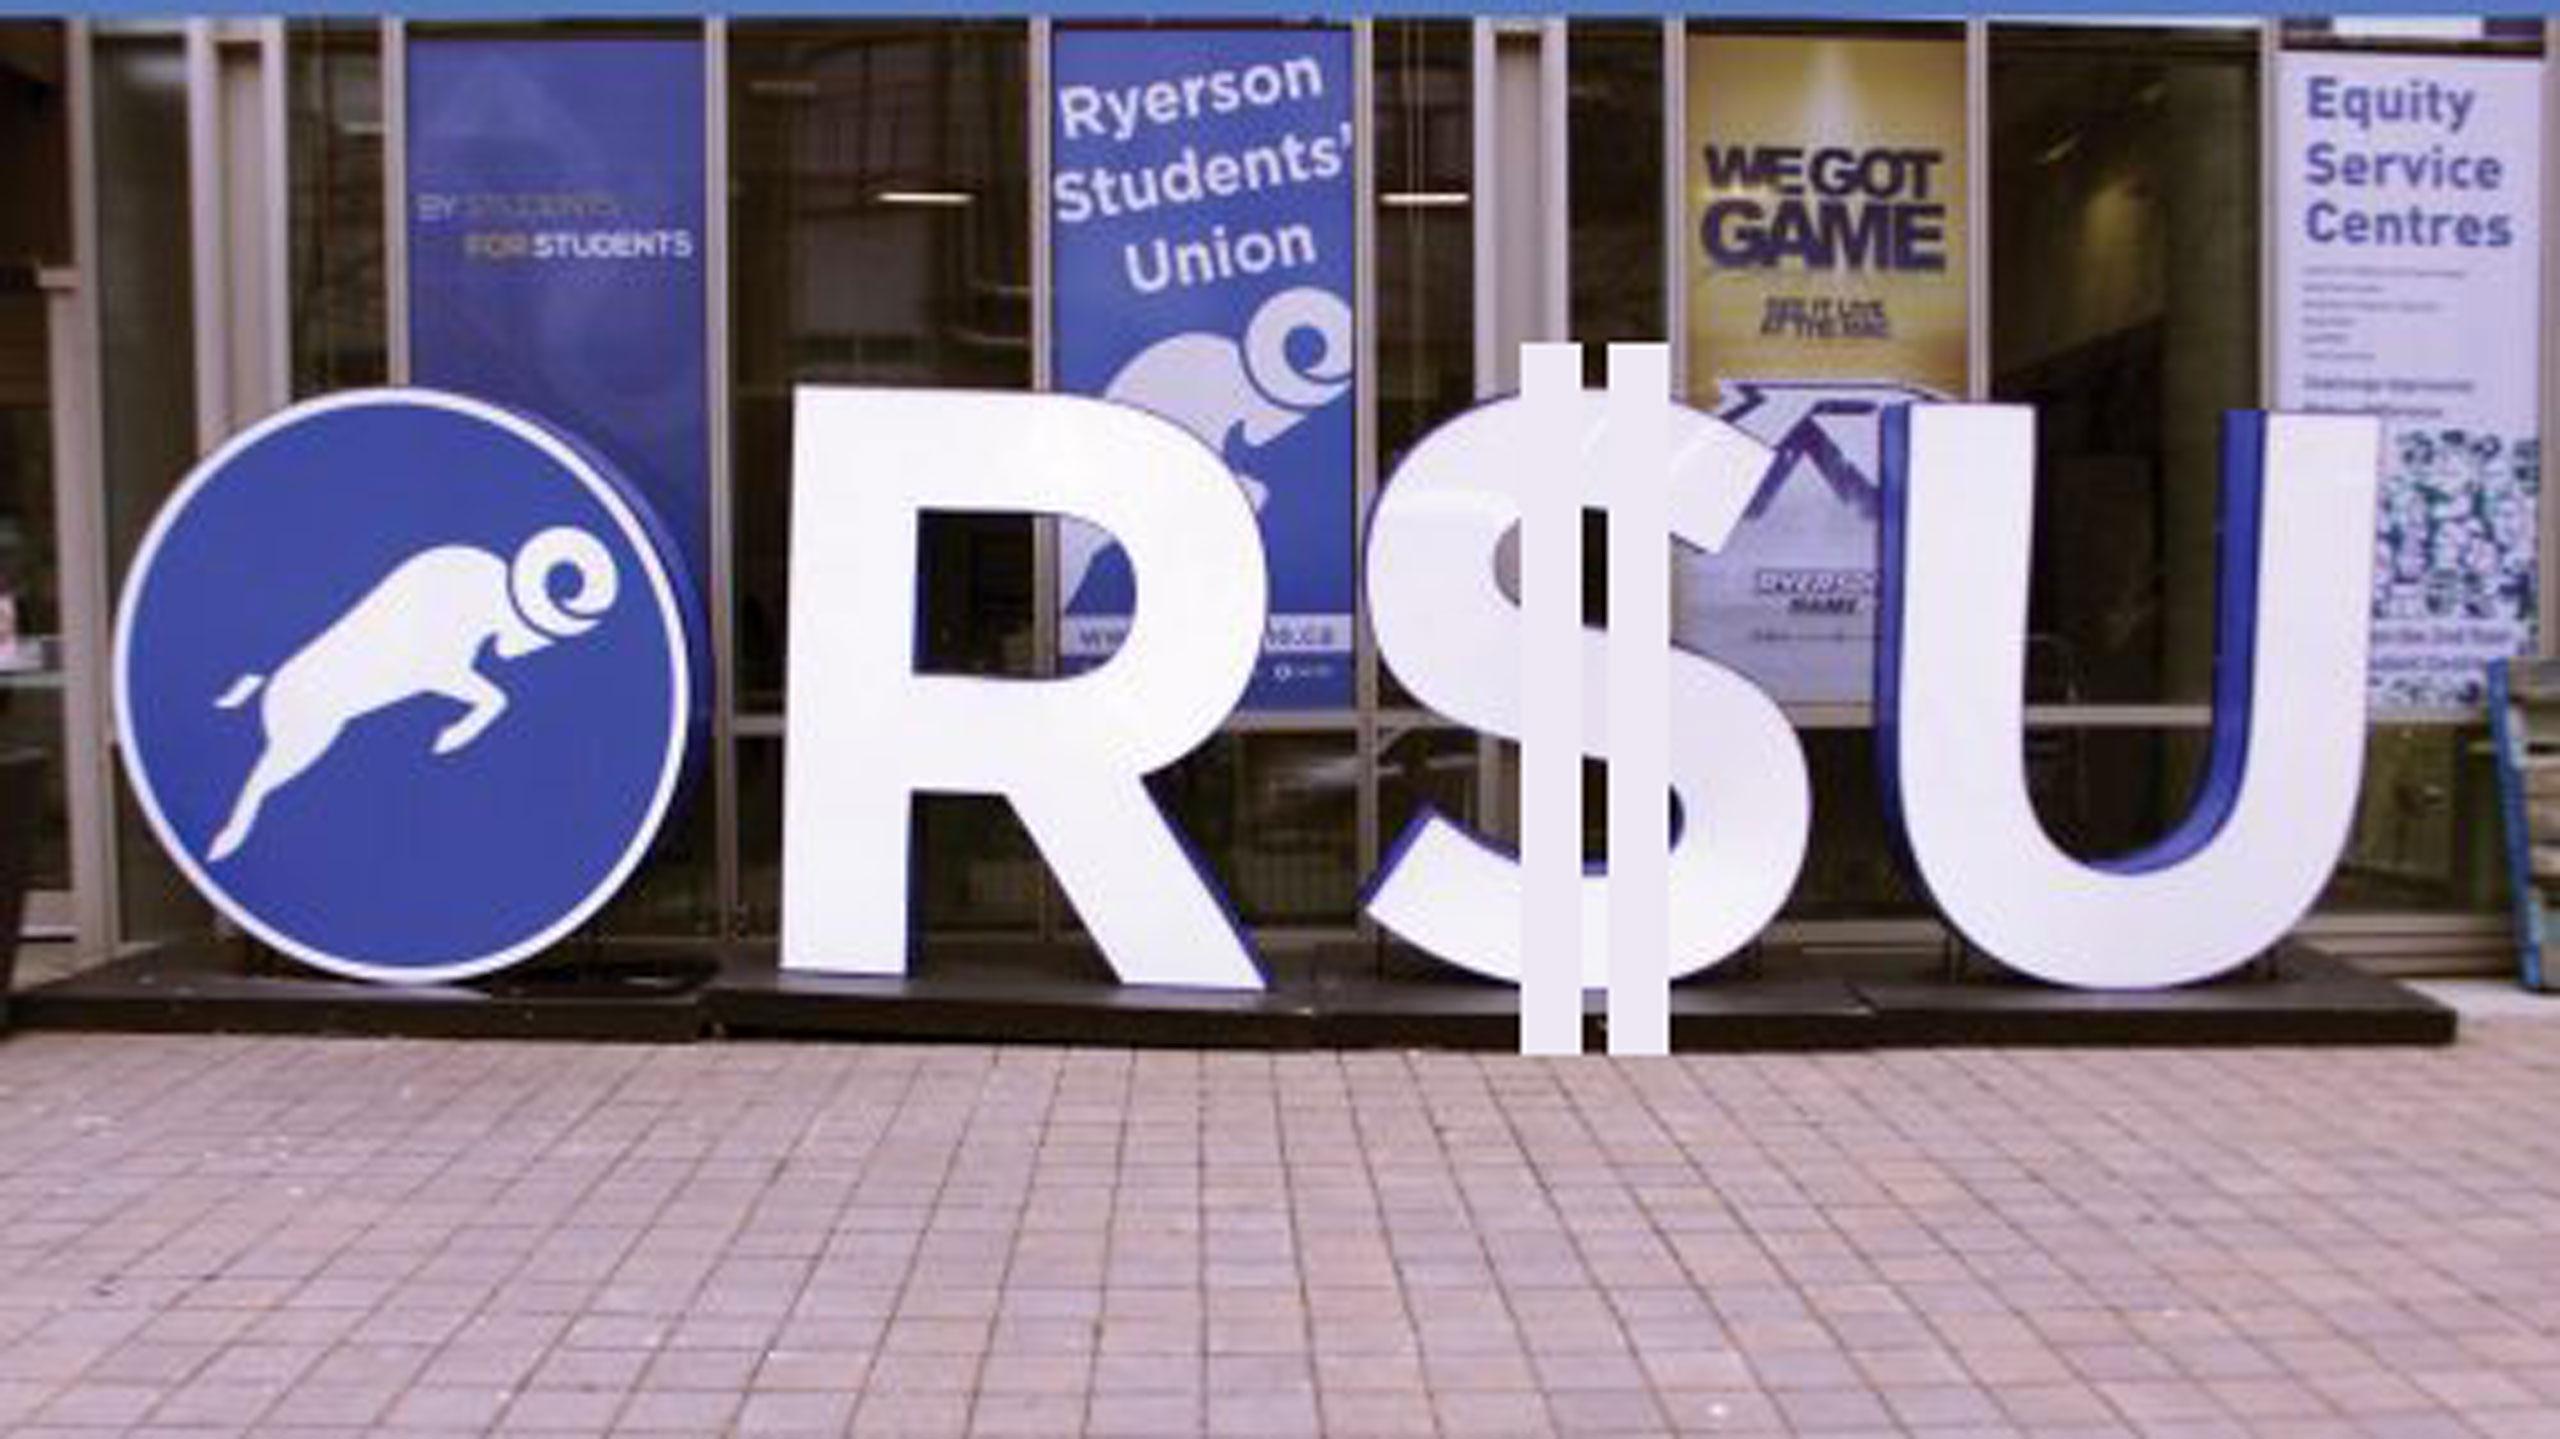 An RSU sign, but the S is a dollar sign.